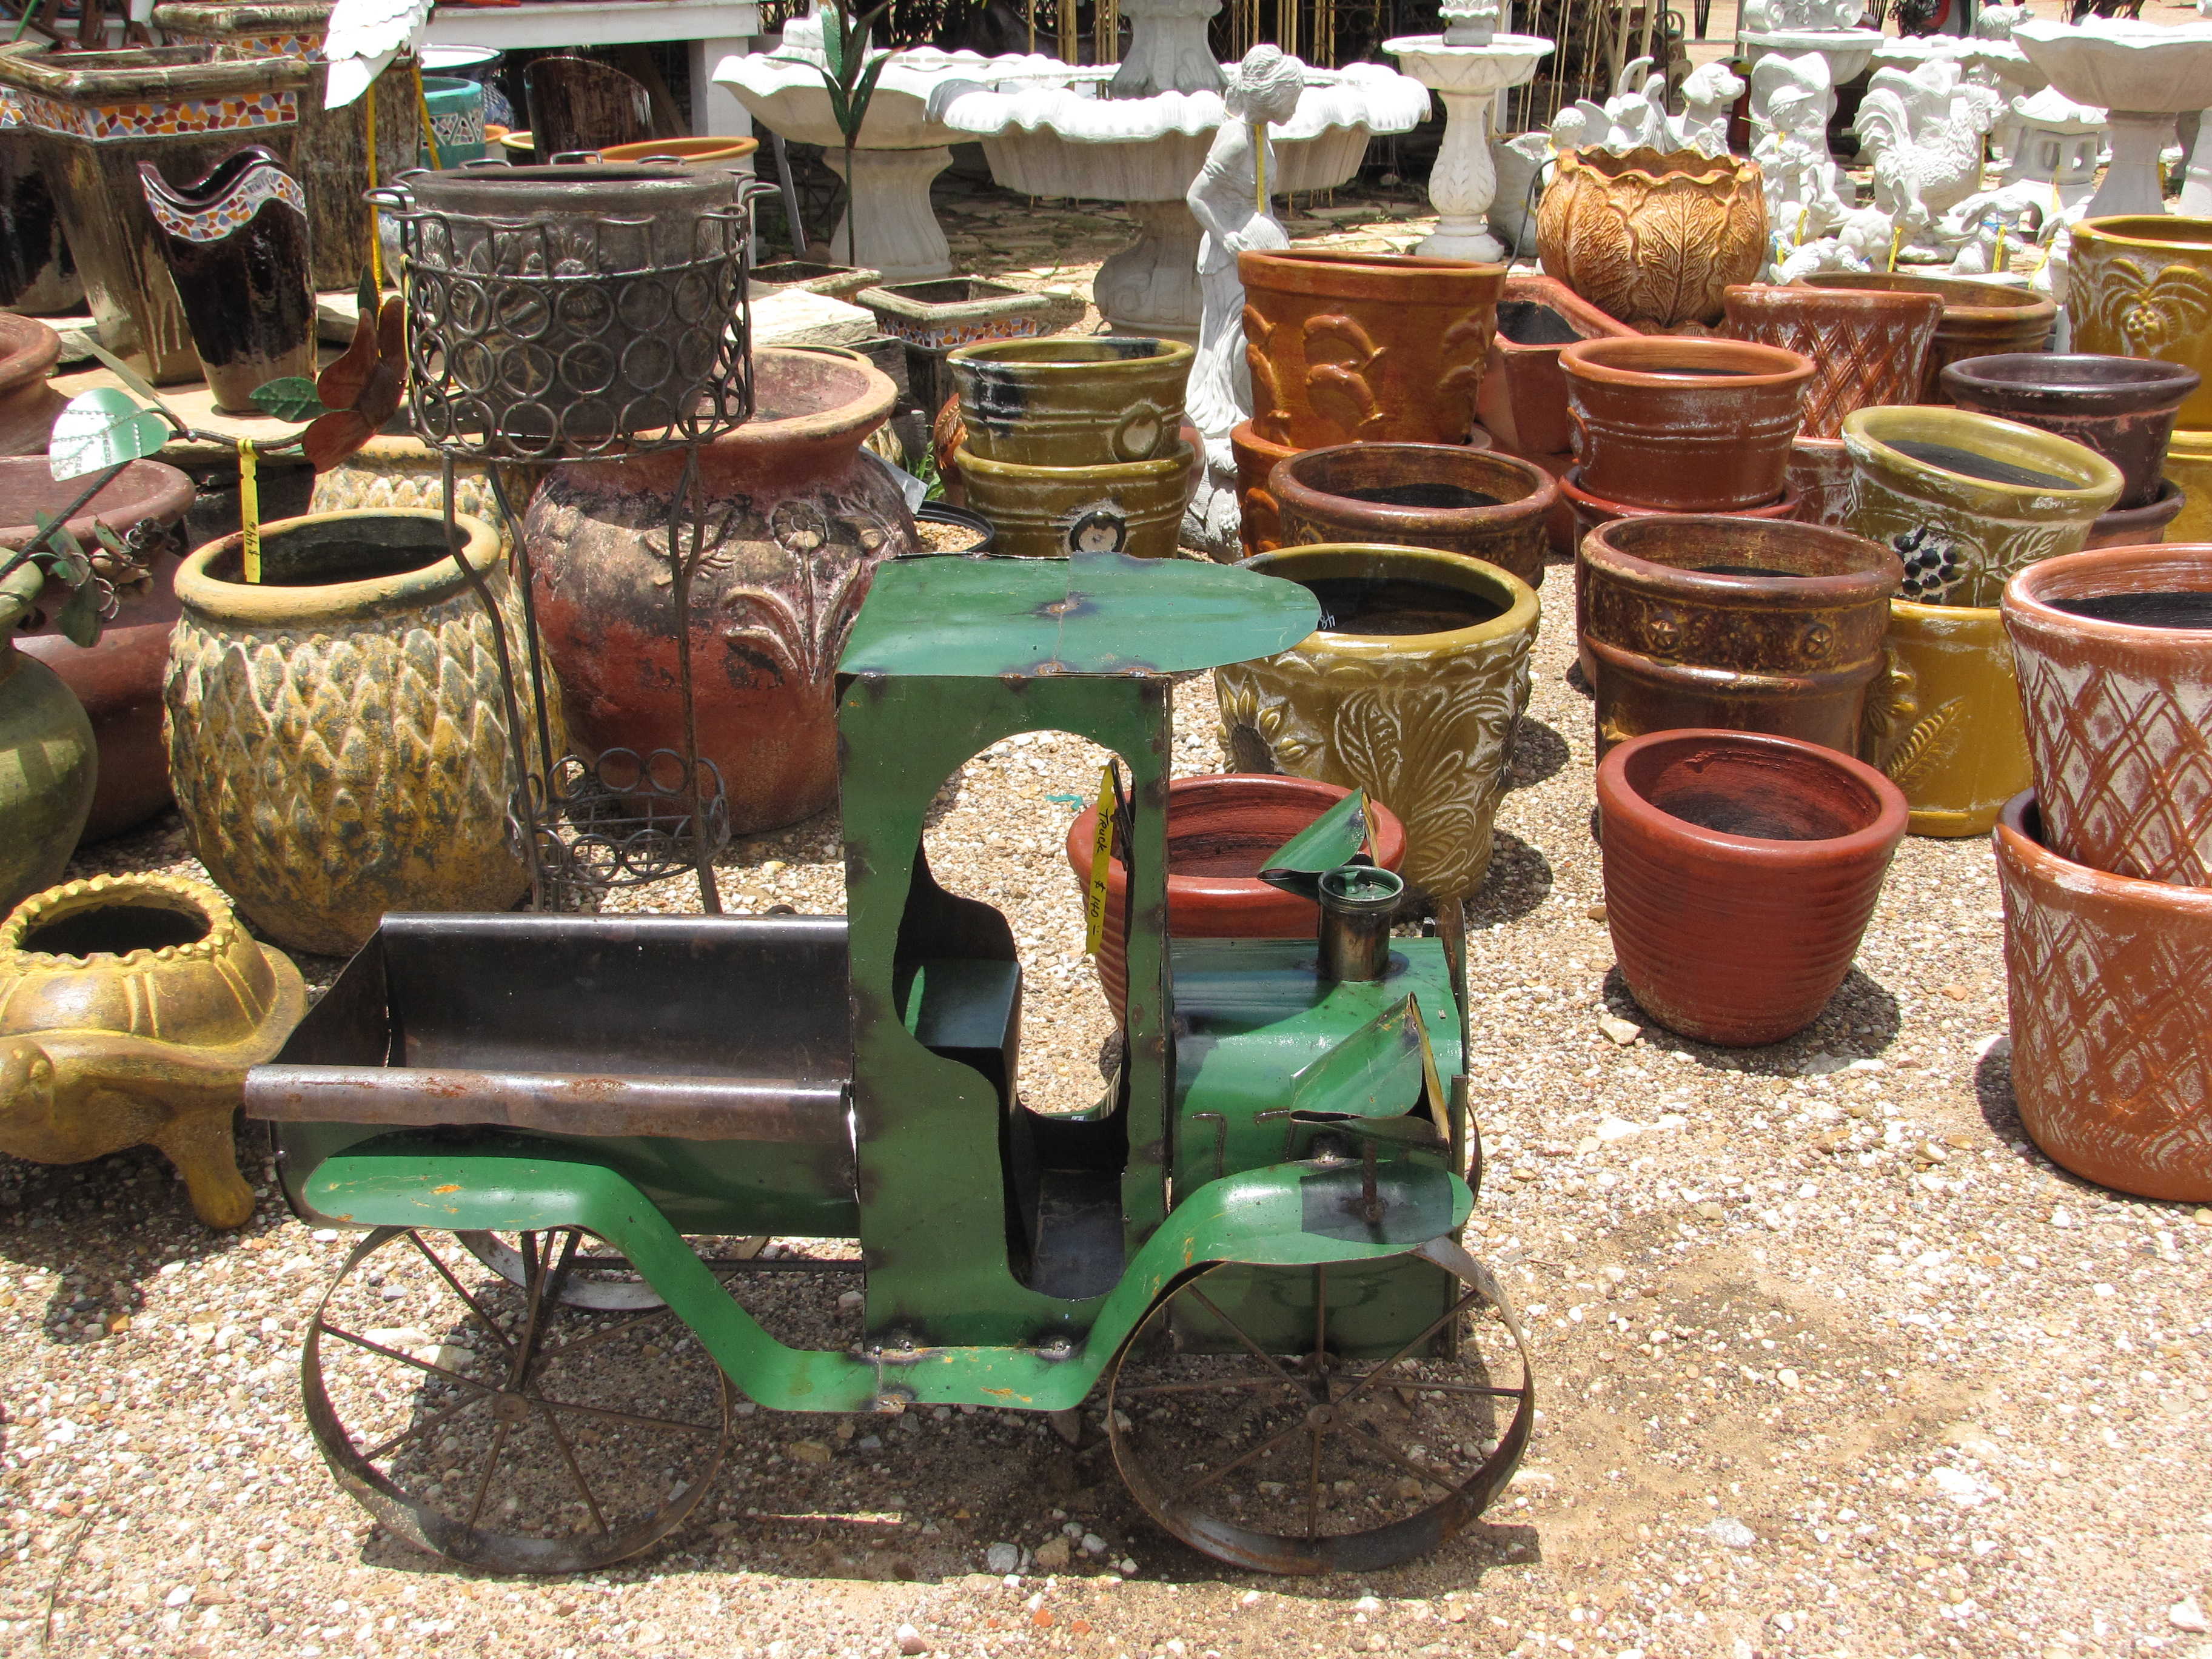 Many kinds of yard decor such as iron, cement and pottery at J&J Nursery, Spring, TX.